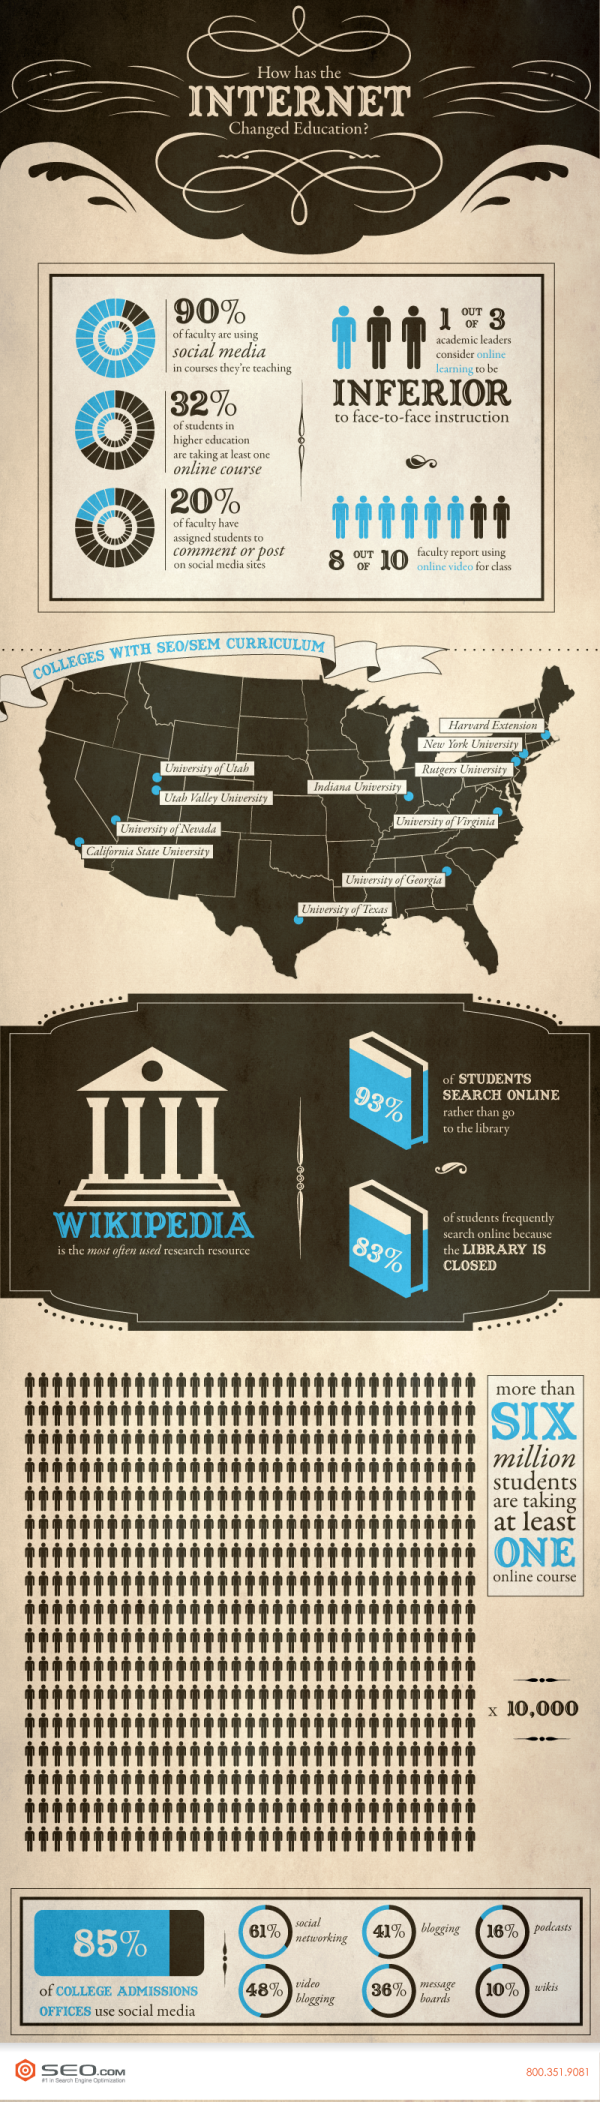 How Has Internet Changed Education? infographic